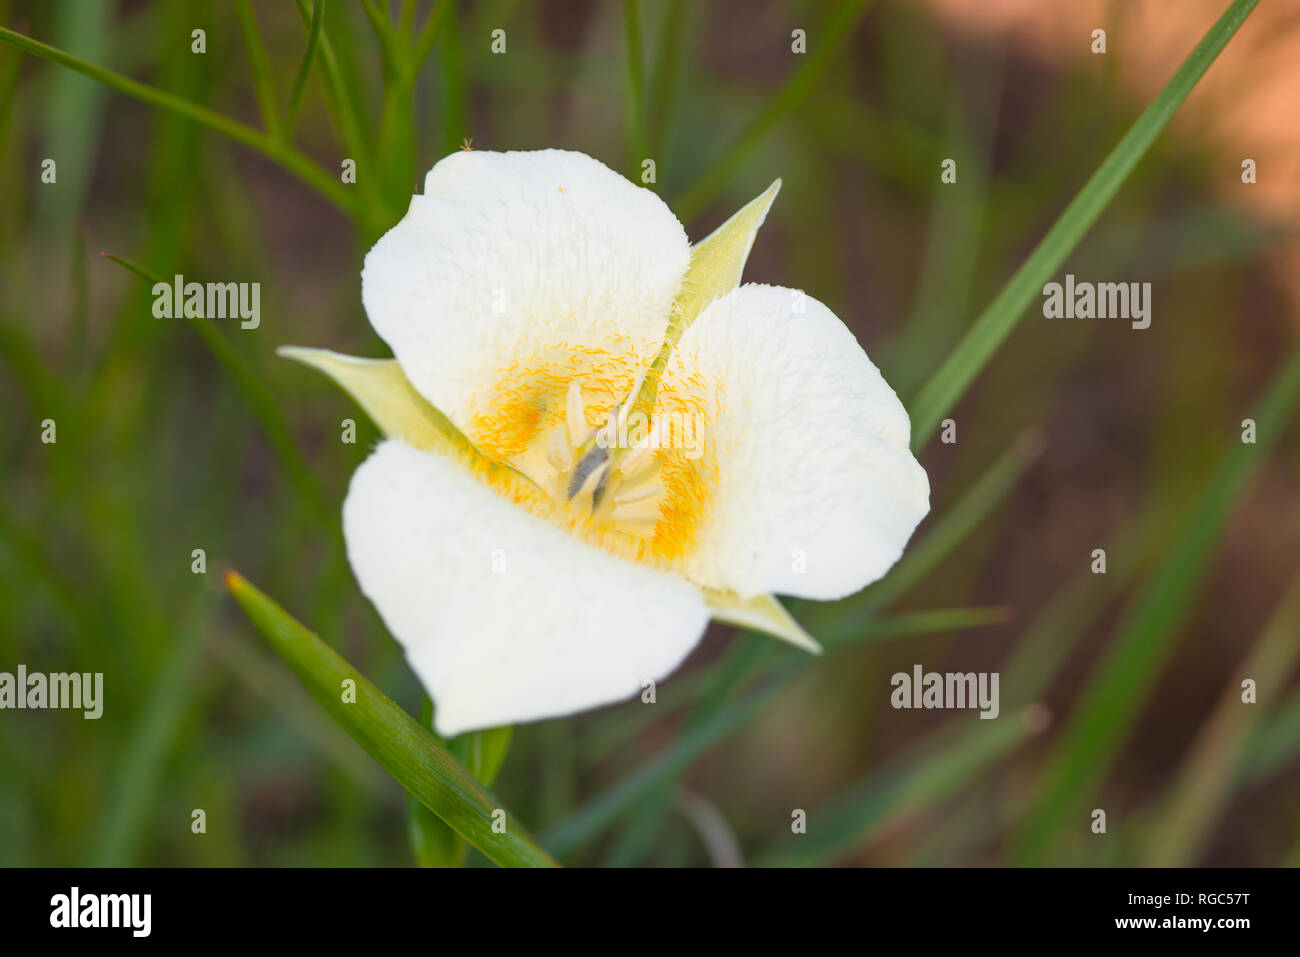 A single mariposa lily blossom, Calochortus apiculatus, growing in the grasslands of Waterton Lakes National Park, Alberta Canada. Stock Photo